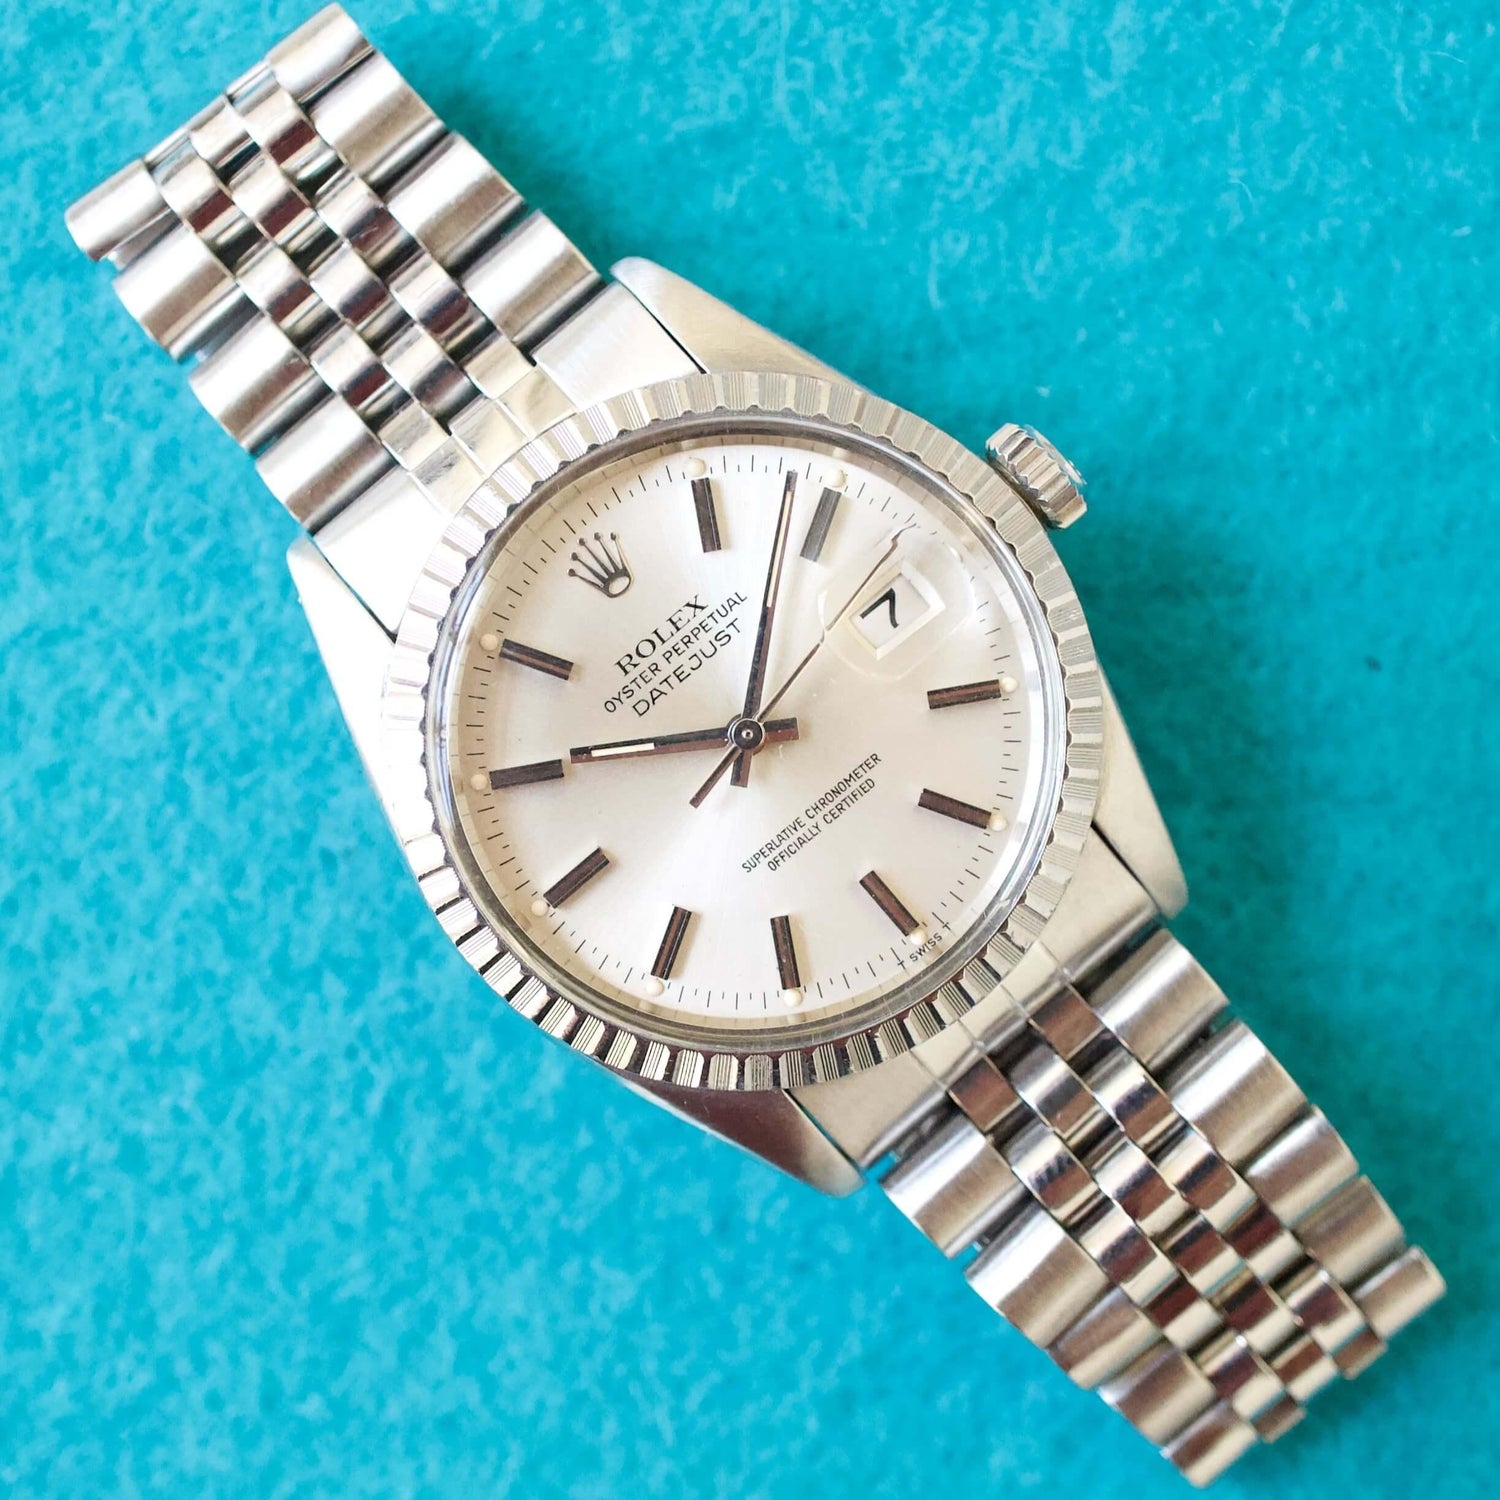 SOLDOUT: Rolex Datejust 36MM 16030 Jubilee  Engine Turned Bezel 1980 1 Year Warranty Box And Papers